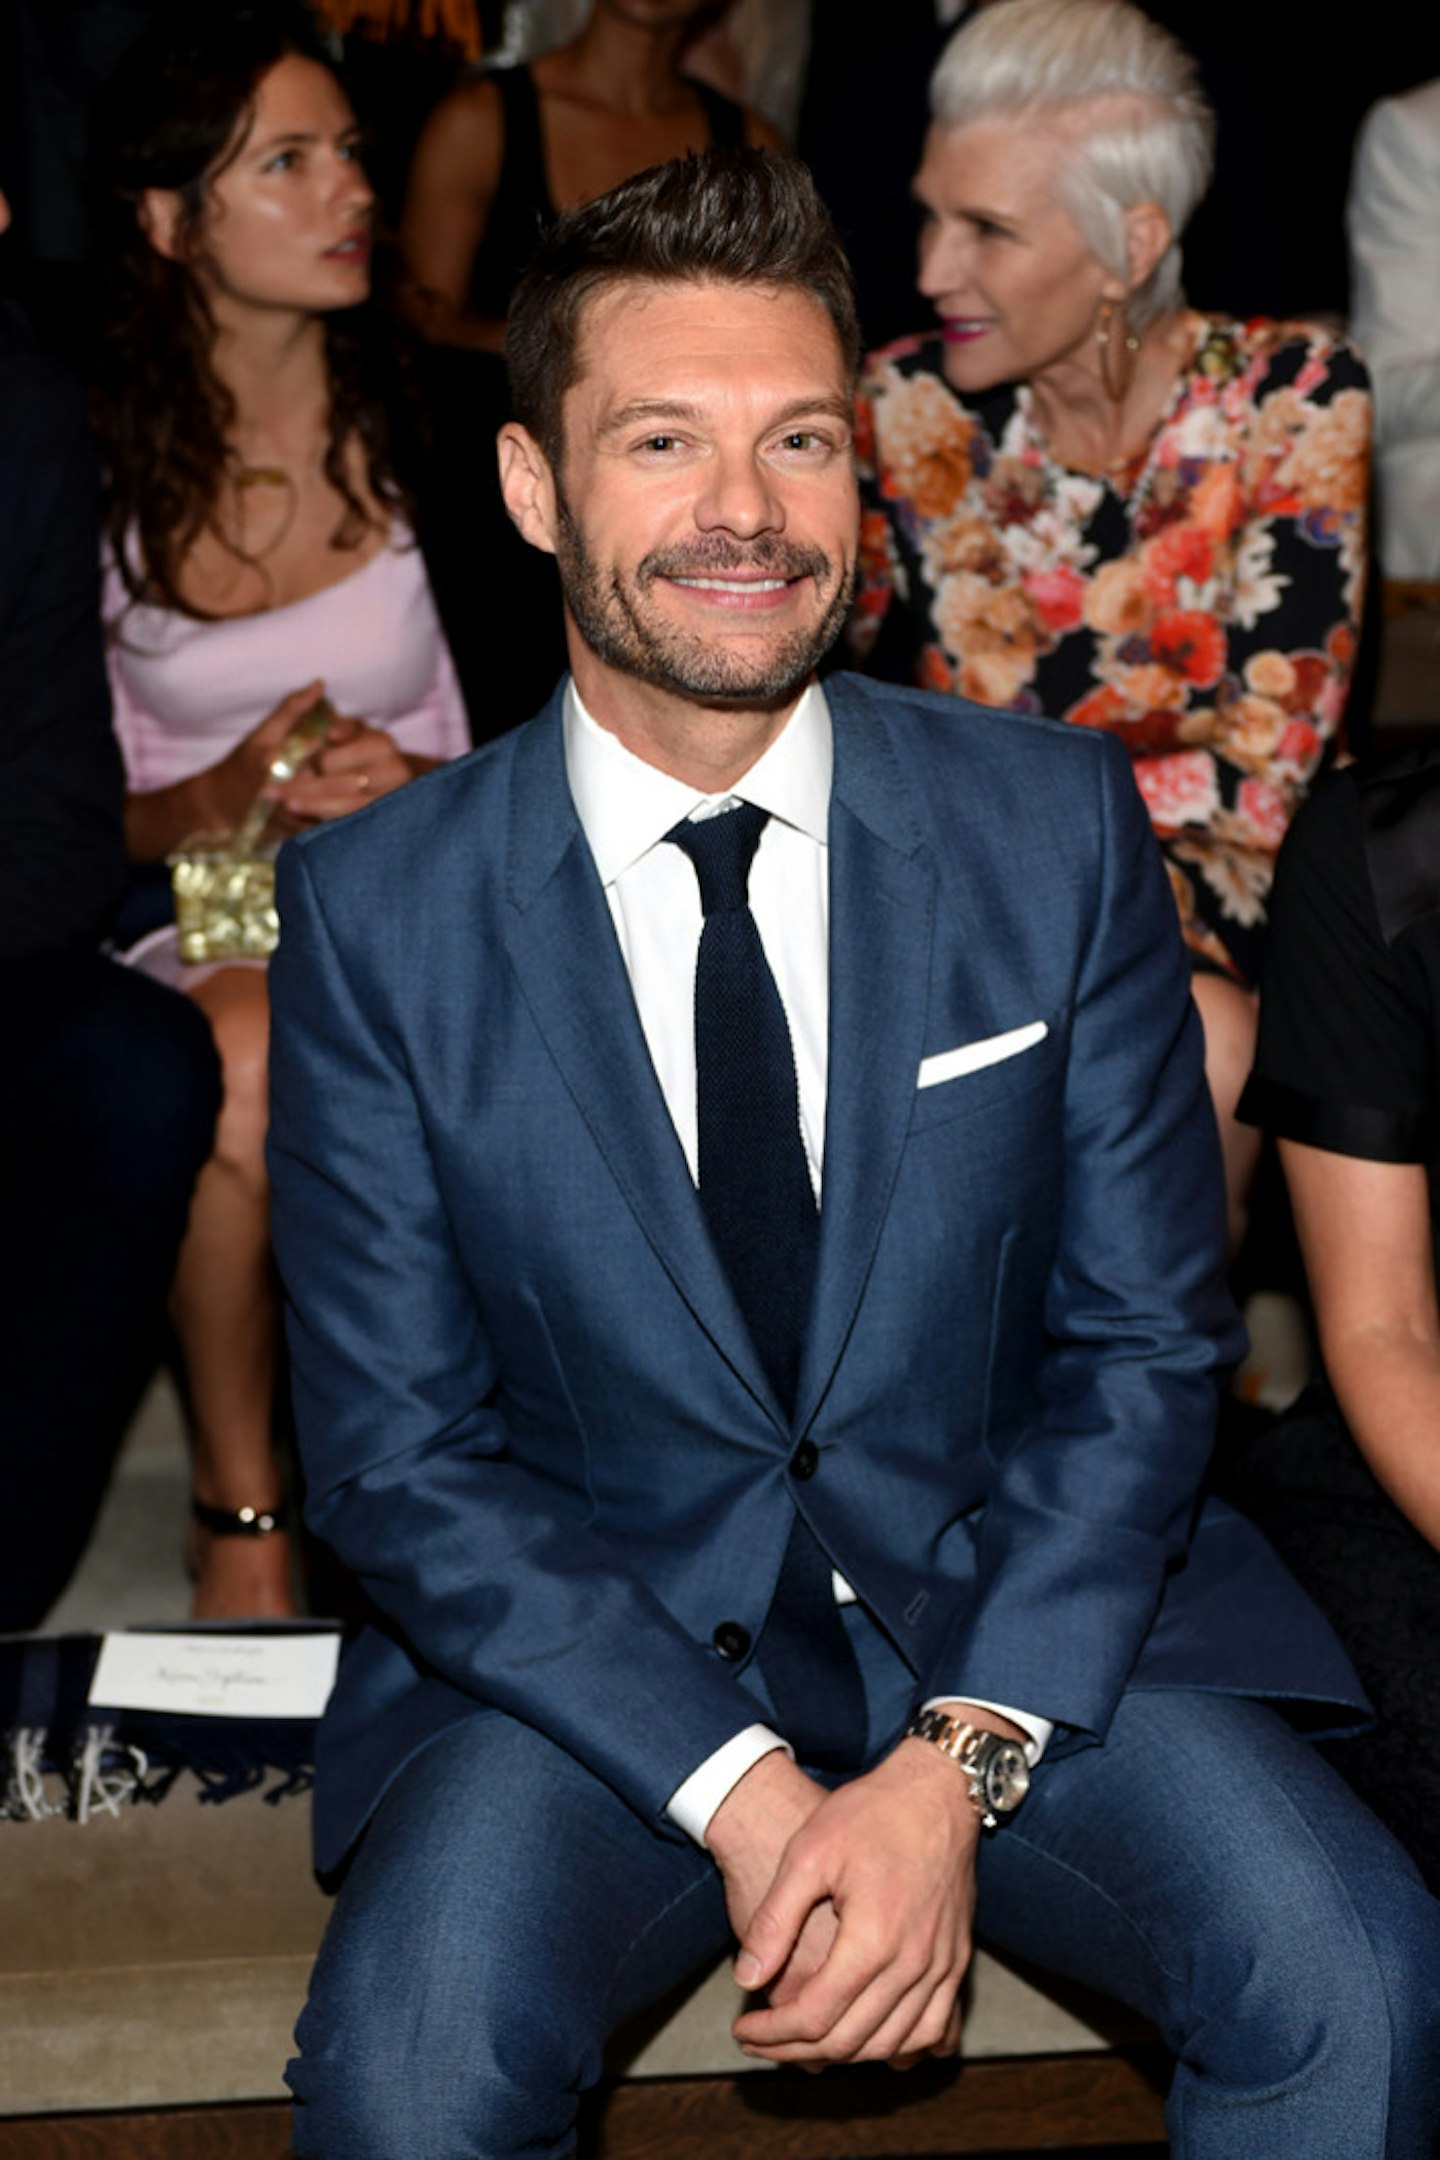 Ryan Seacrest wearing Burberry at the Burberry _London in Los Angeles_ event